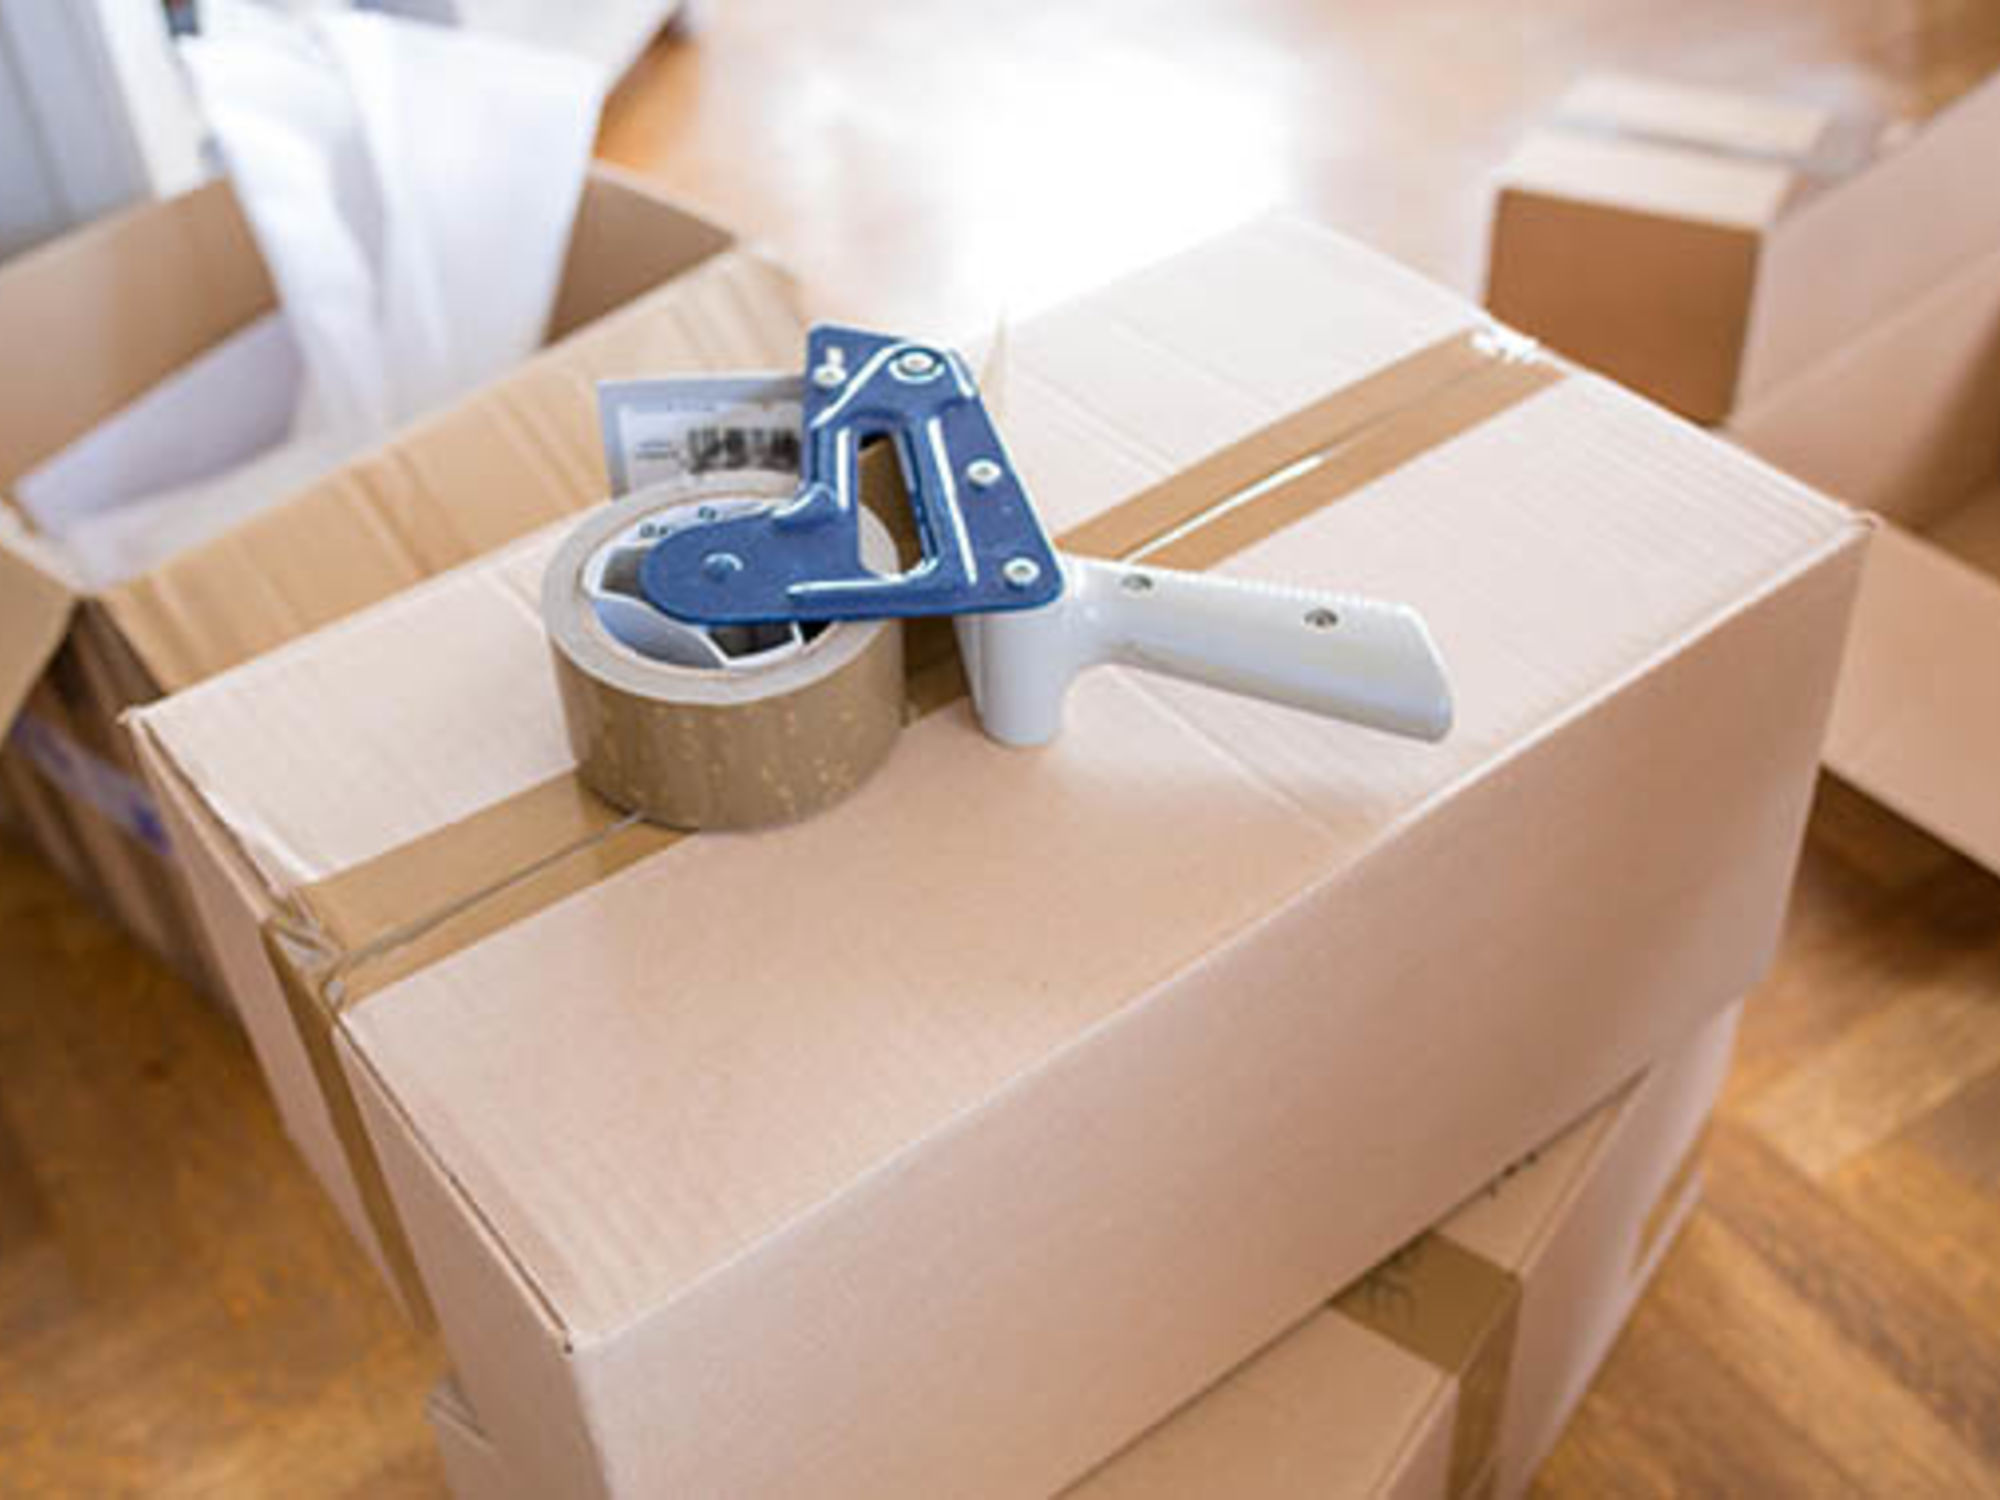 Where to buy moving supplies for cheap